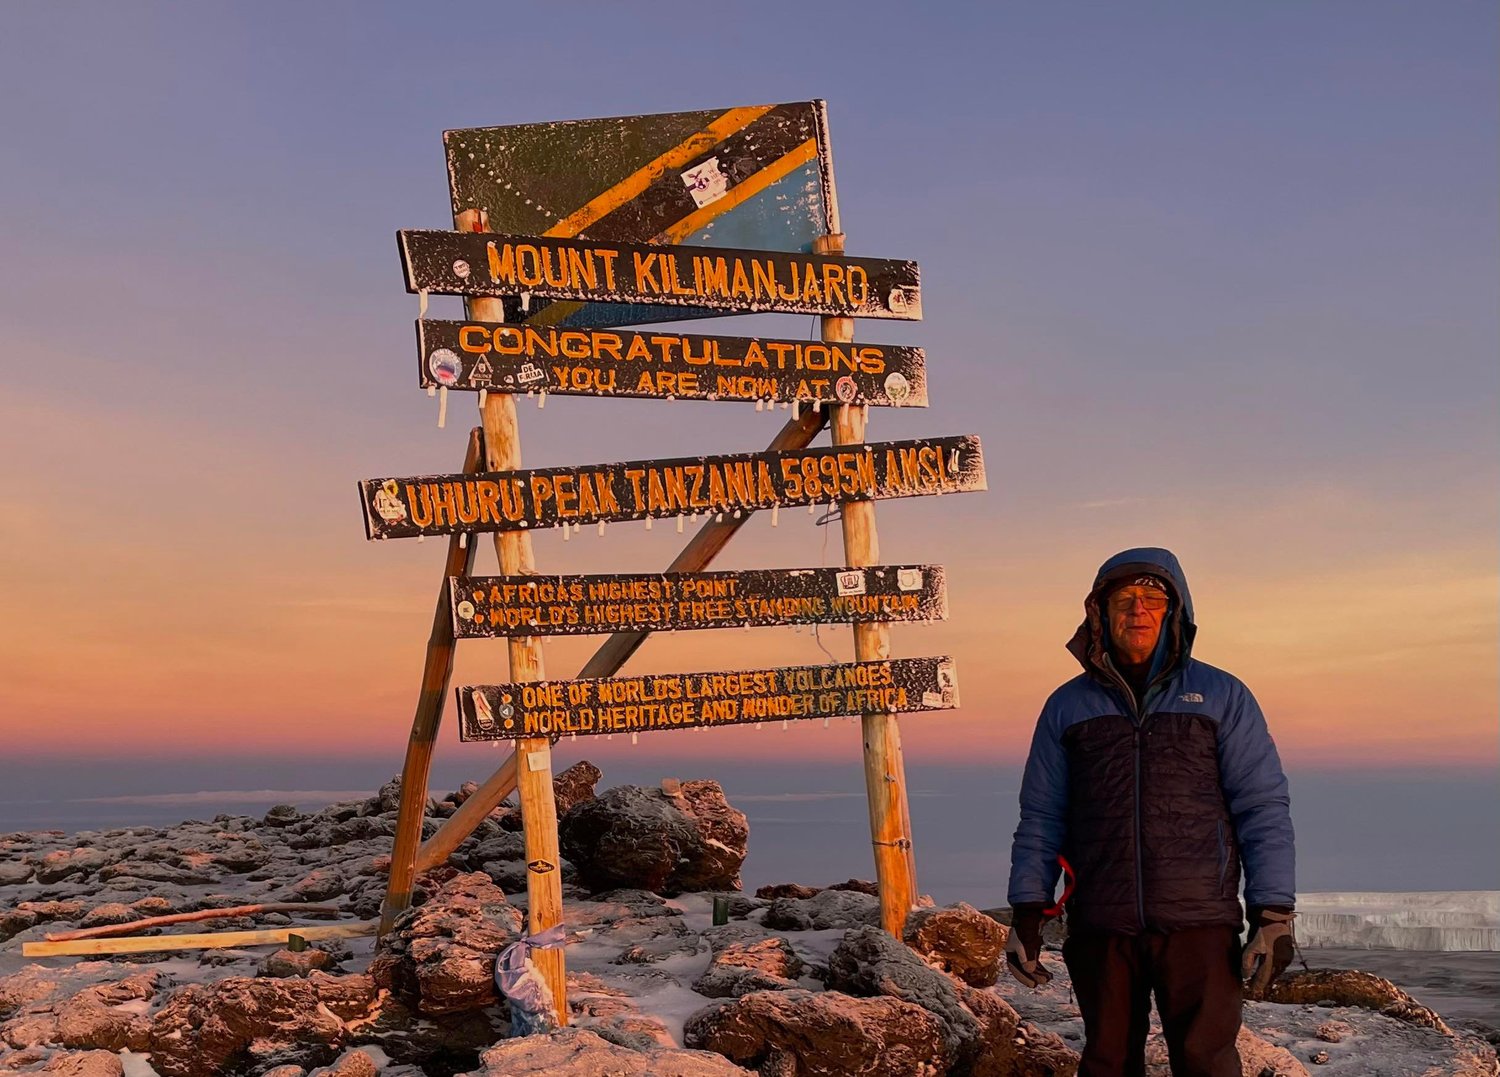 Centralia resident Neal Kirby stands at the summit of Mount Kilimanjaro on the morning of Thanksgiving in this photograph he provided to The Chronicle.